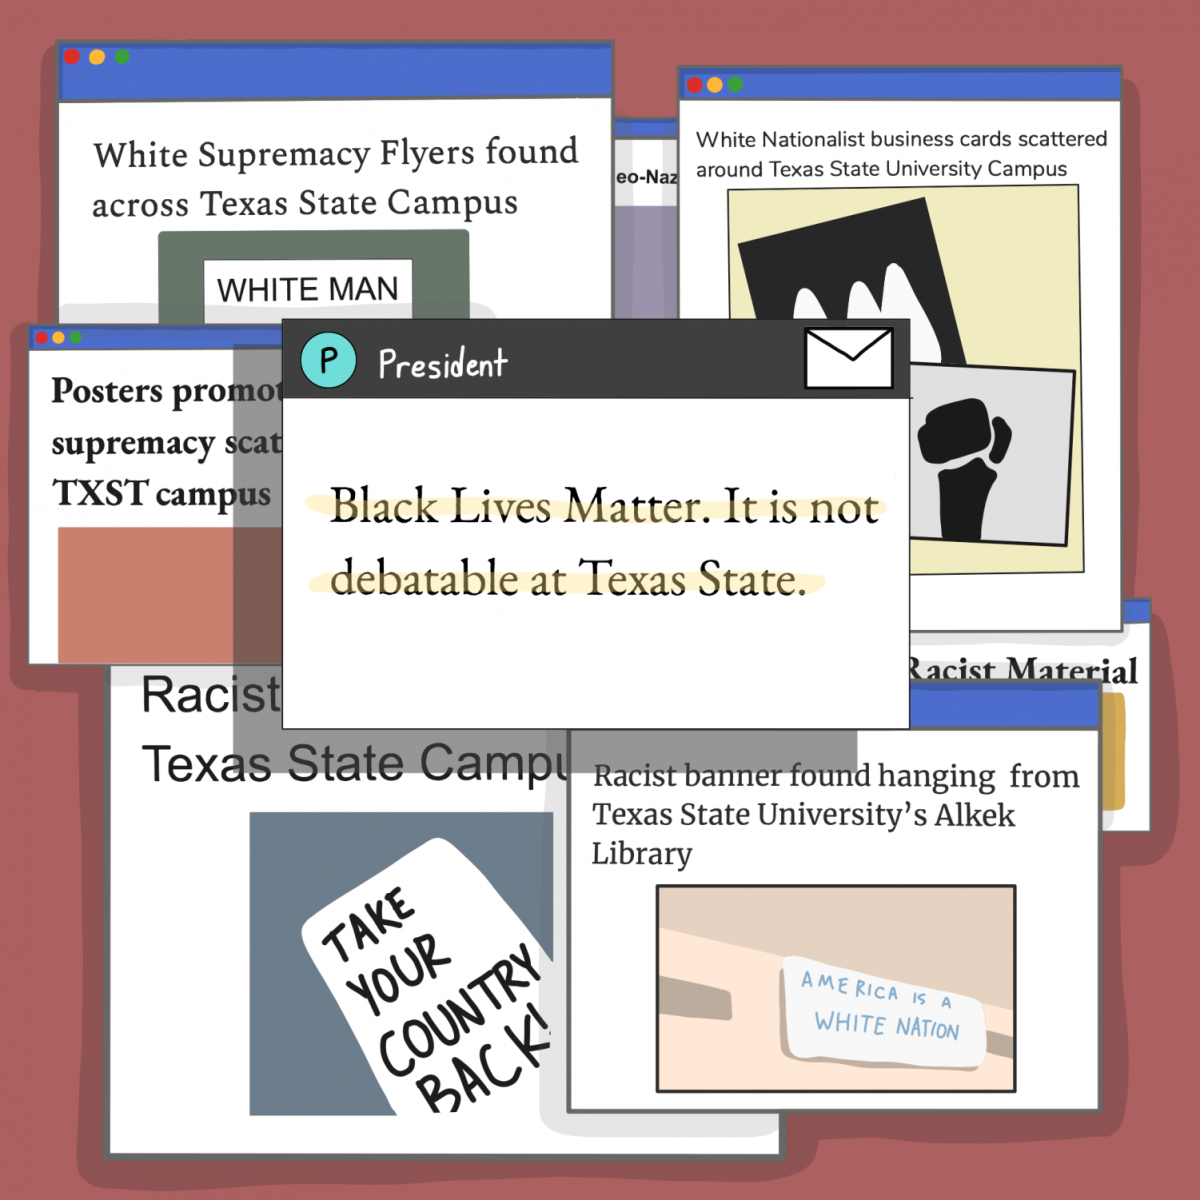 An+illustration+of+several+open+computer+windows.+Each+window+displays+headlines+about+incidents+involving+white+supremacists+on+the+Texas+State+campus+except+for+one+that+depicts+an+email+from+President+Trauth+about+the+Black+Lives+Matter+movement